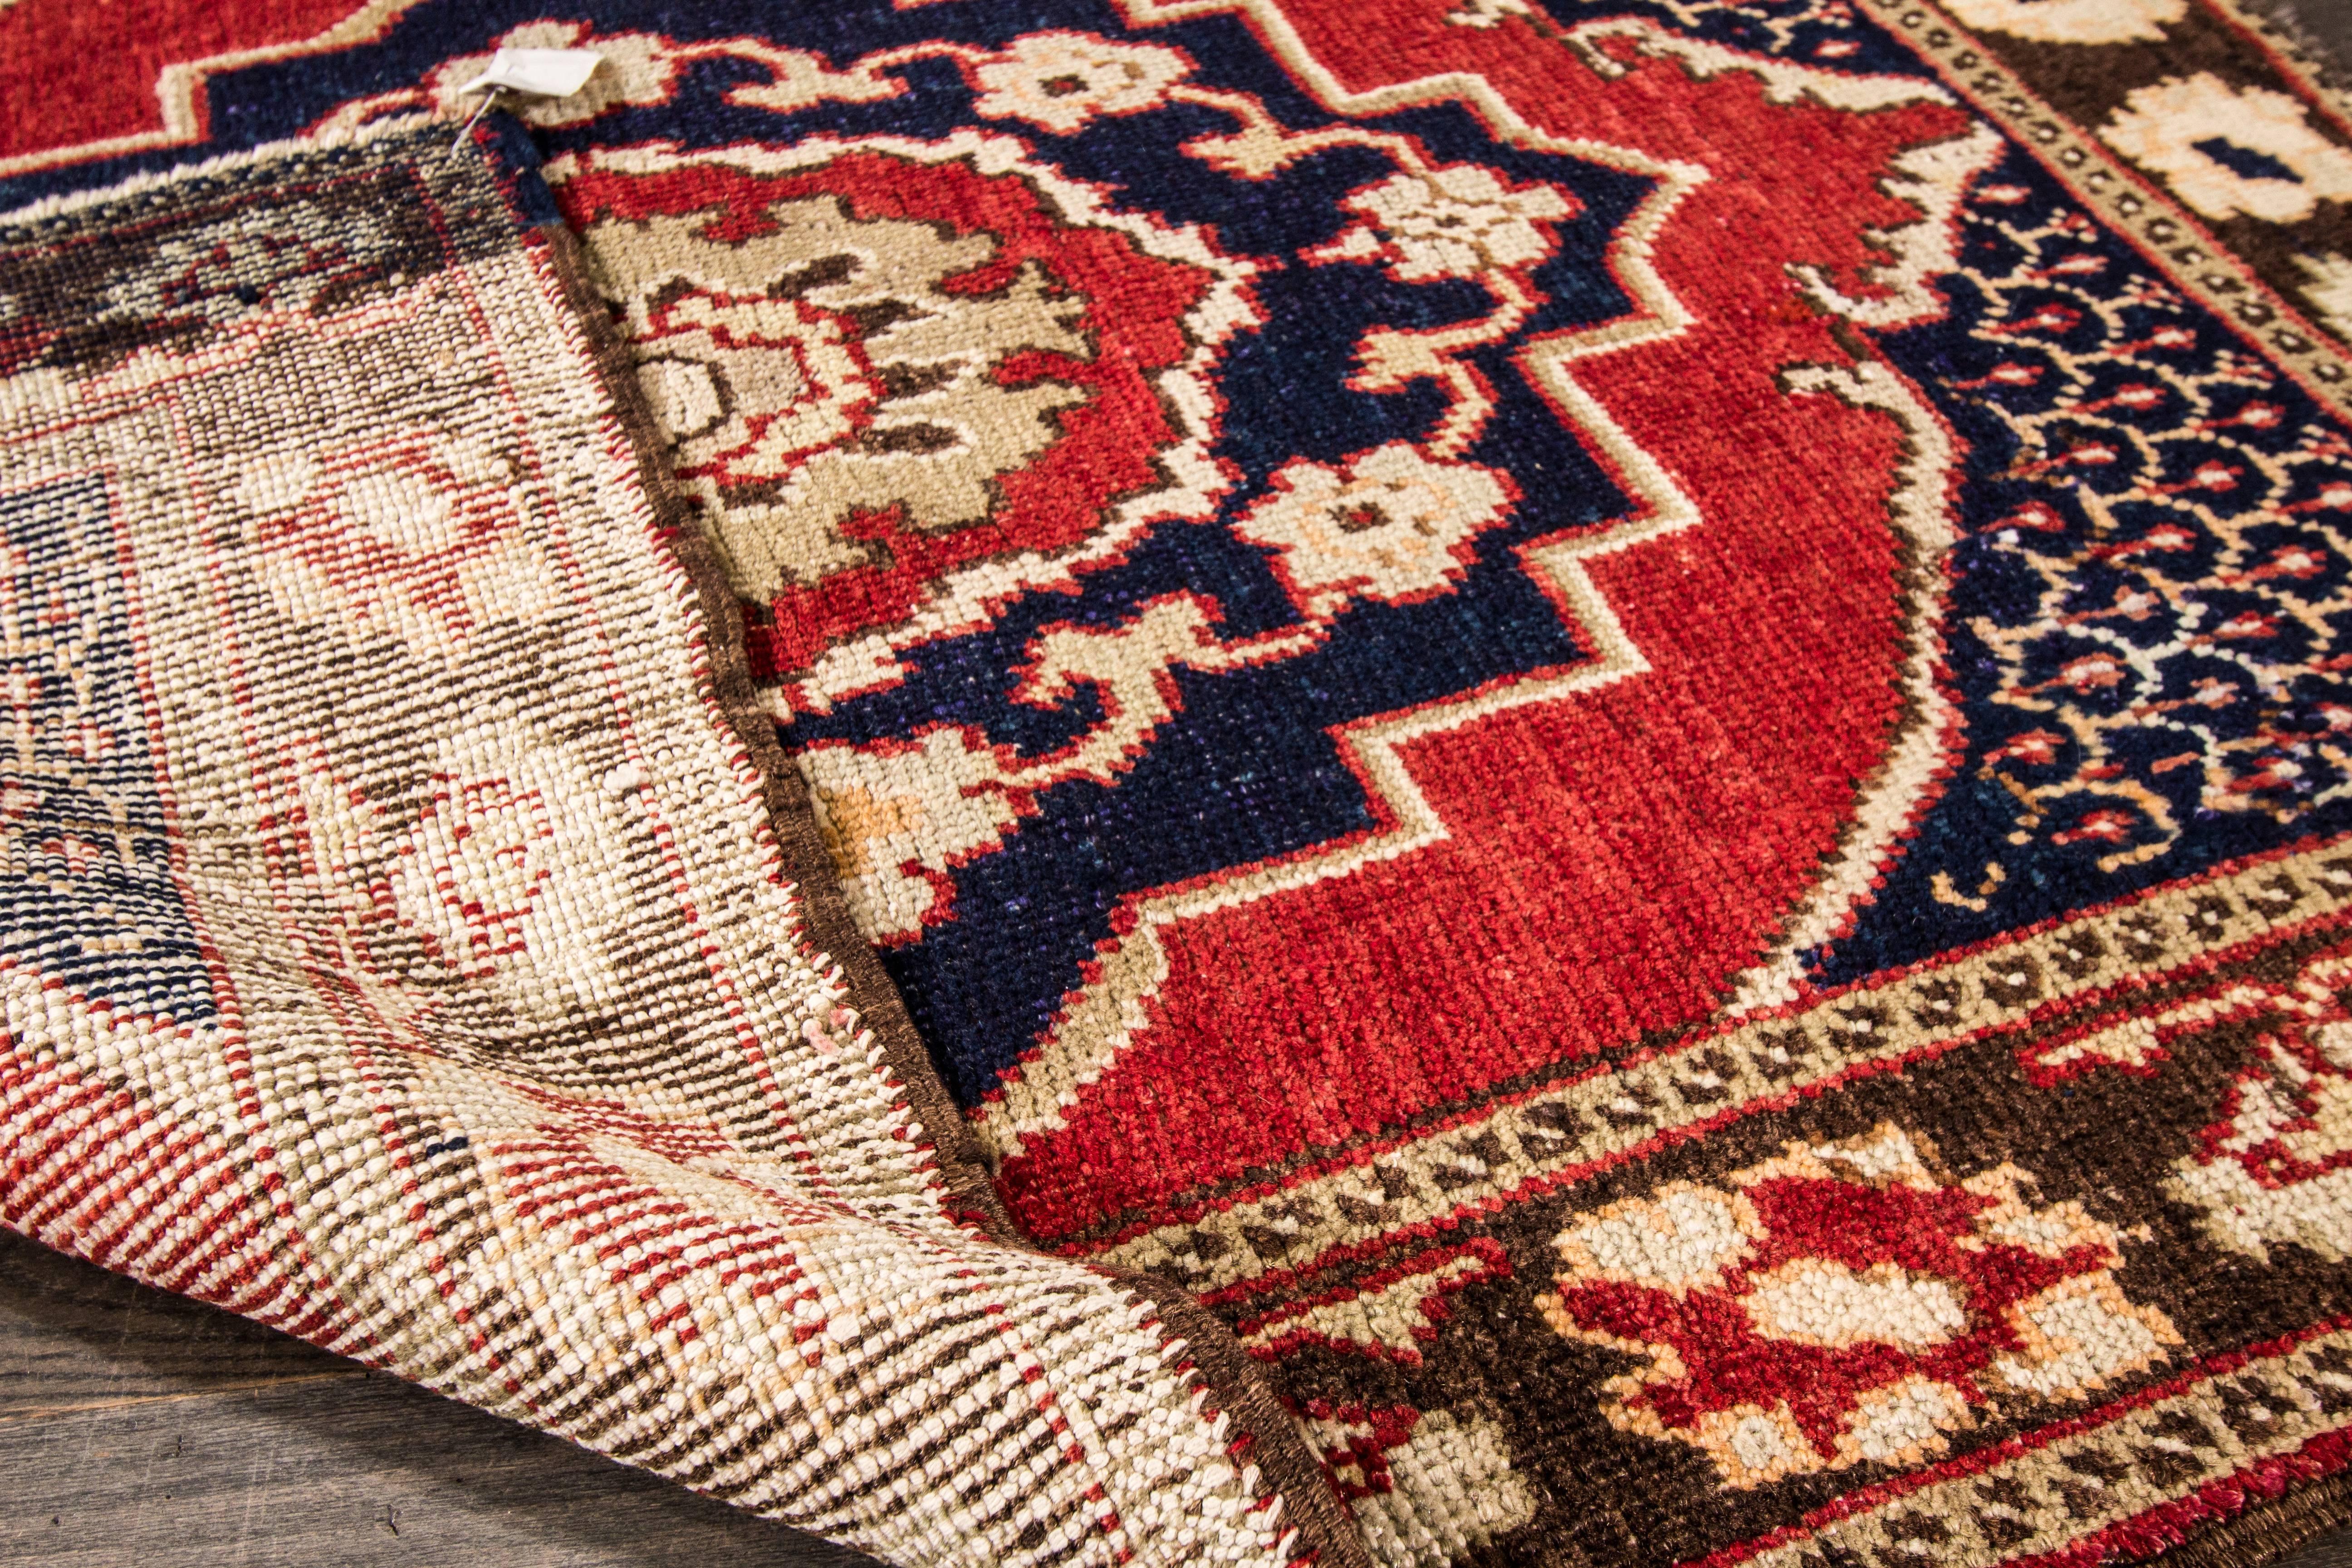 Vintage Hand-knotted rug with a geometric design on a red field with blue borders. Measures: 3'9